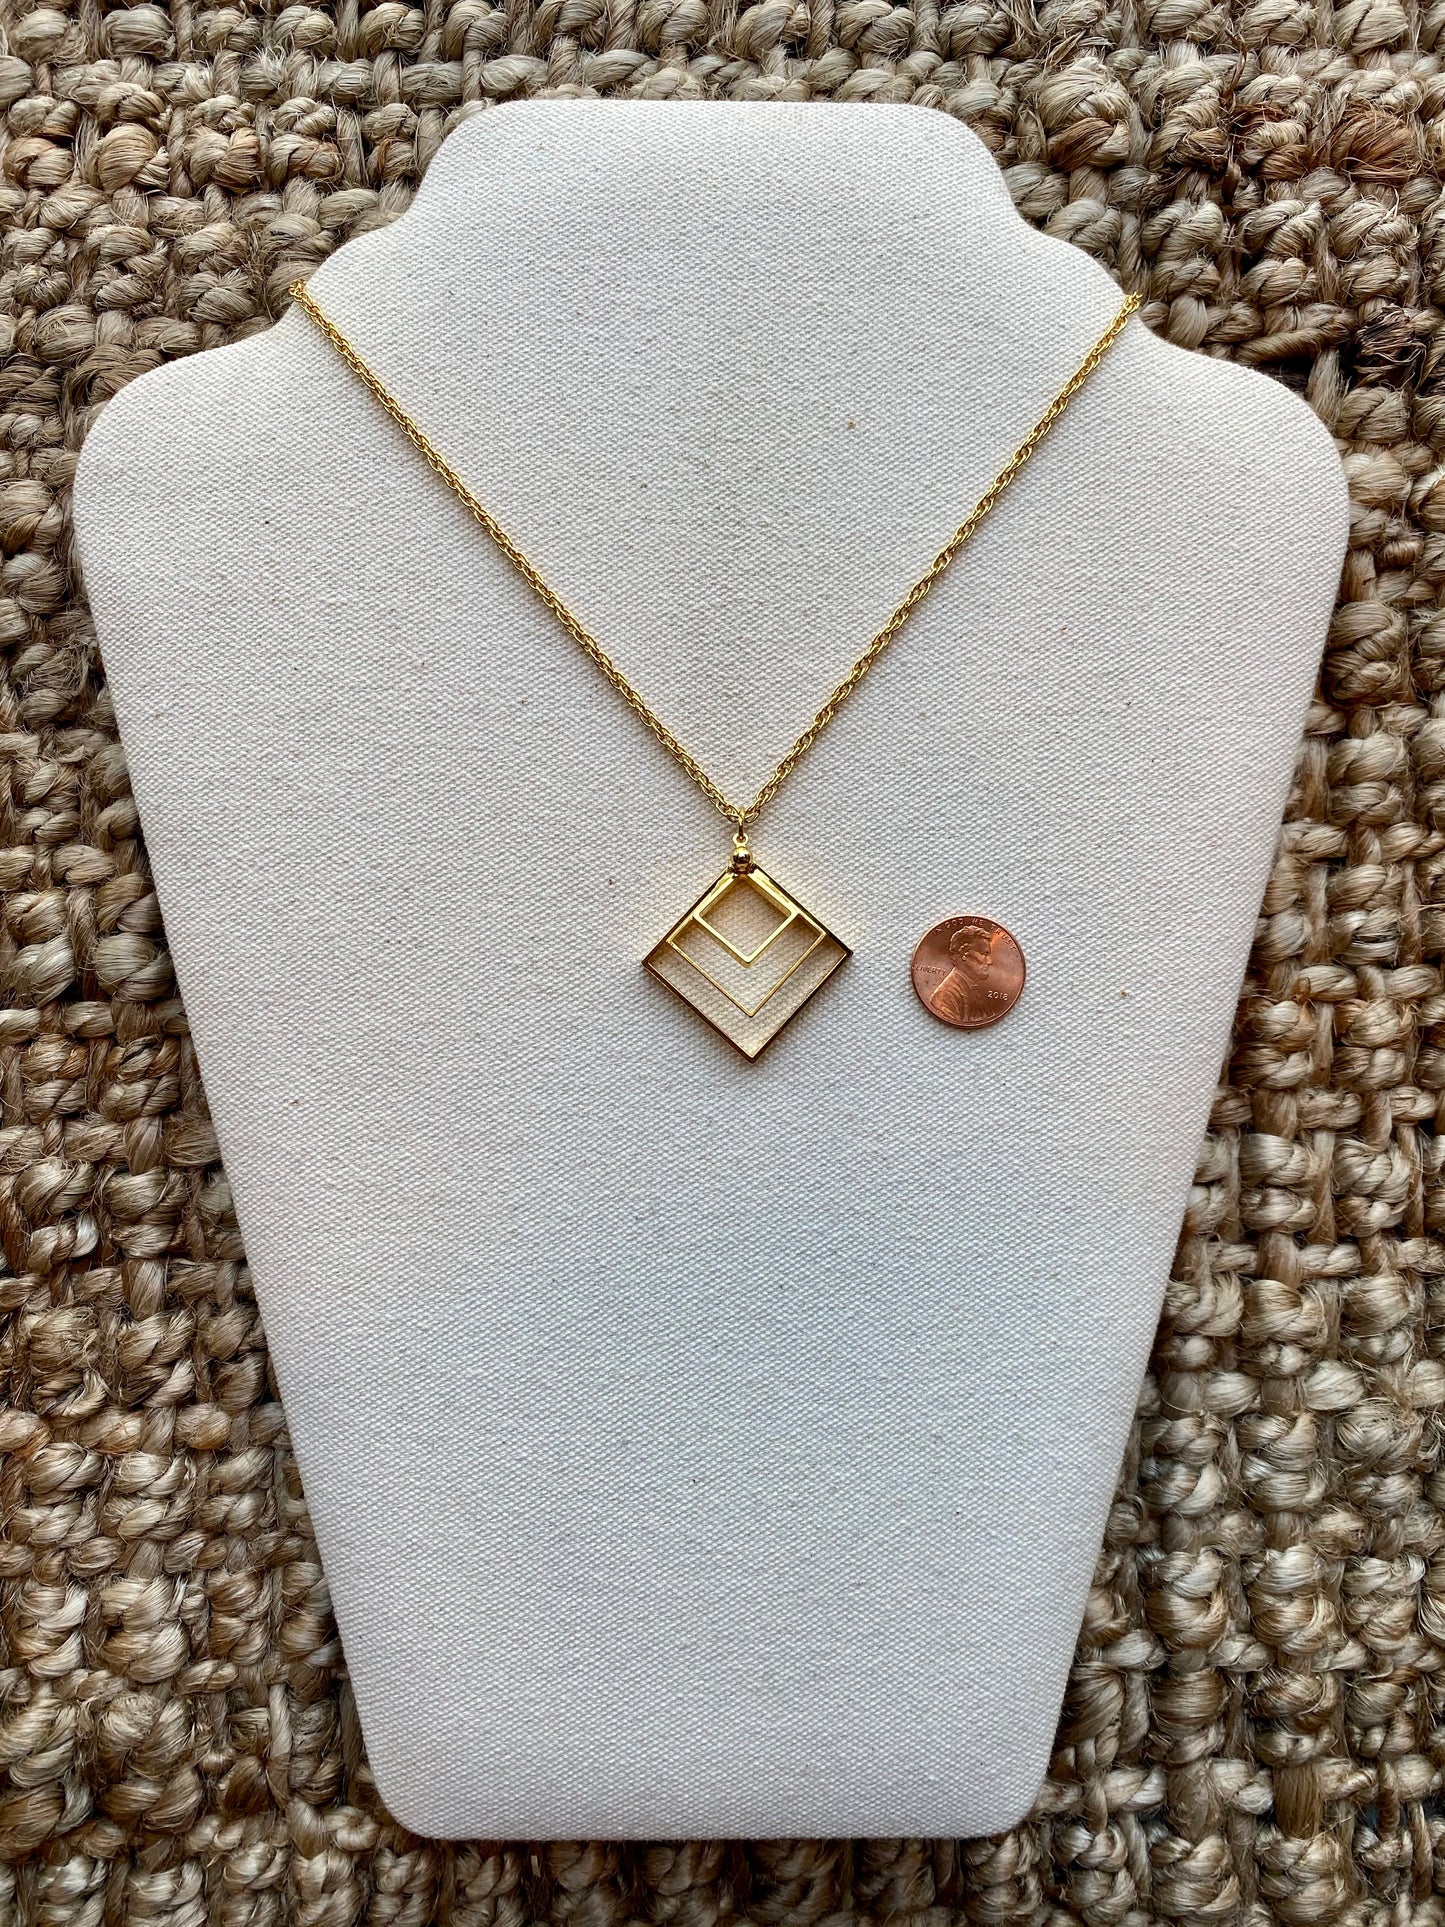 Three Dimensional Triangle Necklace